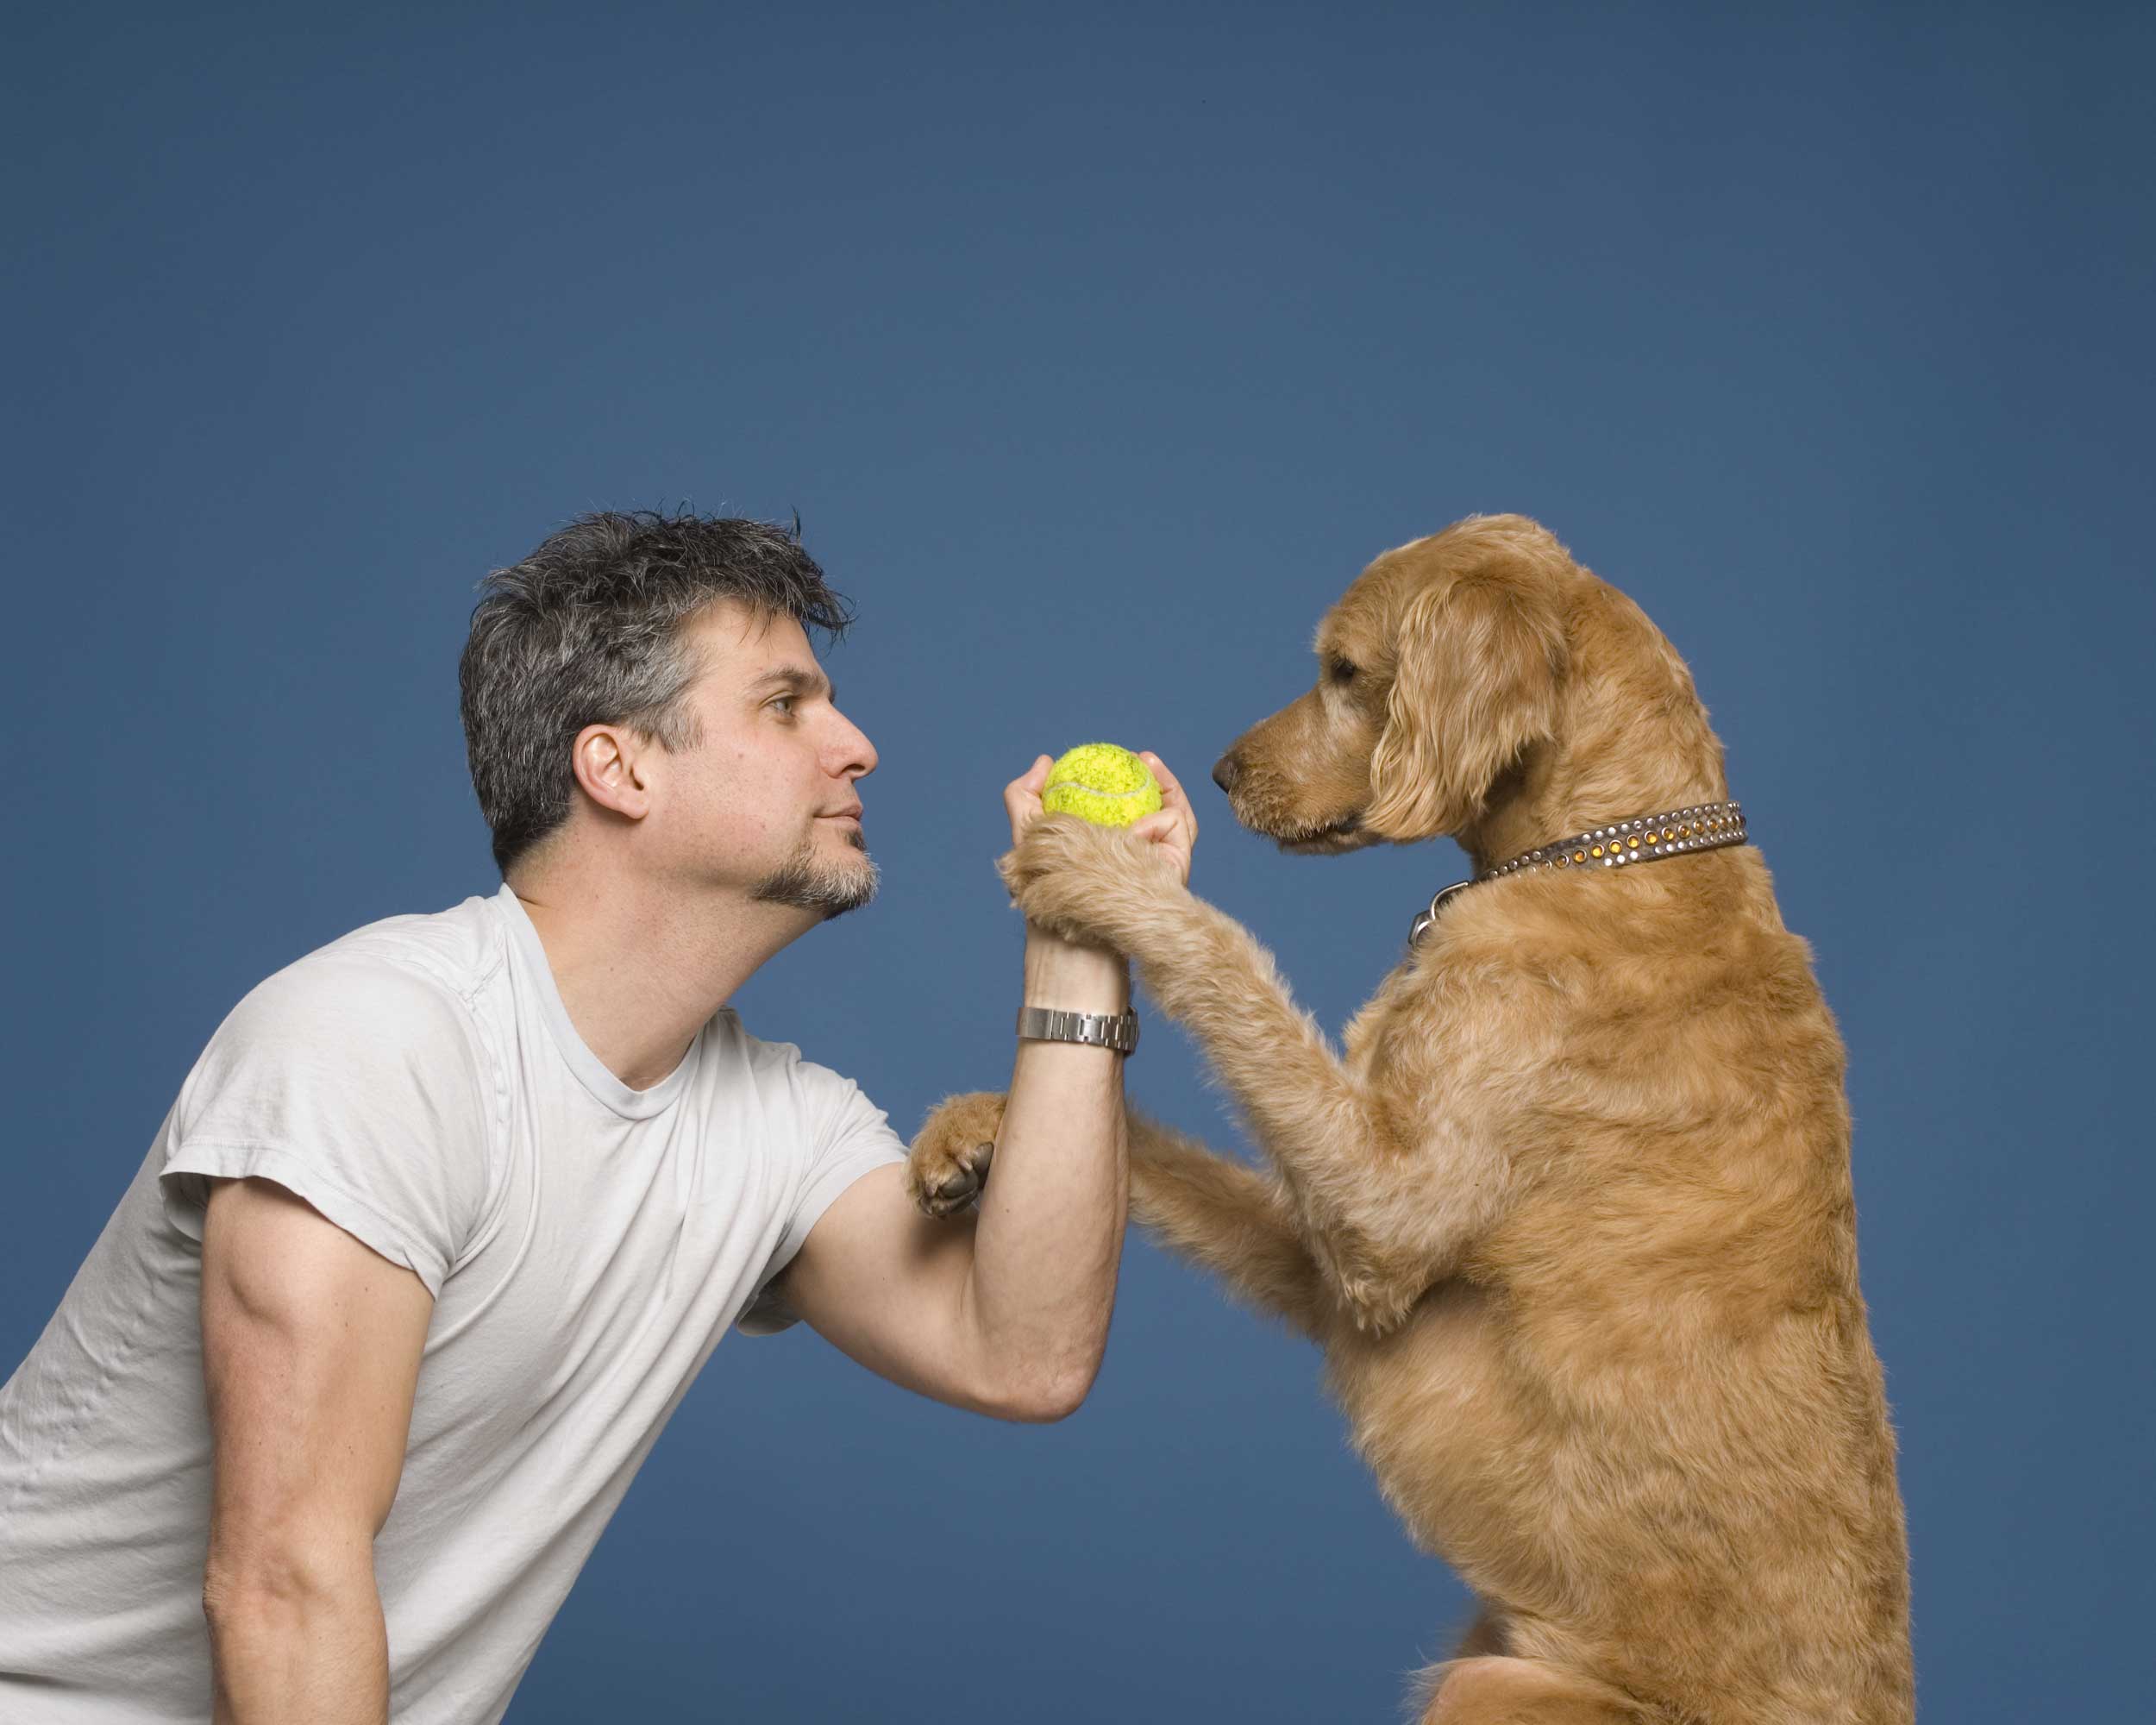 Garth Stein with a tennis ball in his hand showing it to his Labradoodle sitting in front of him